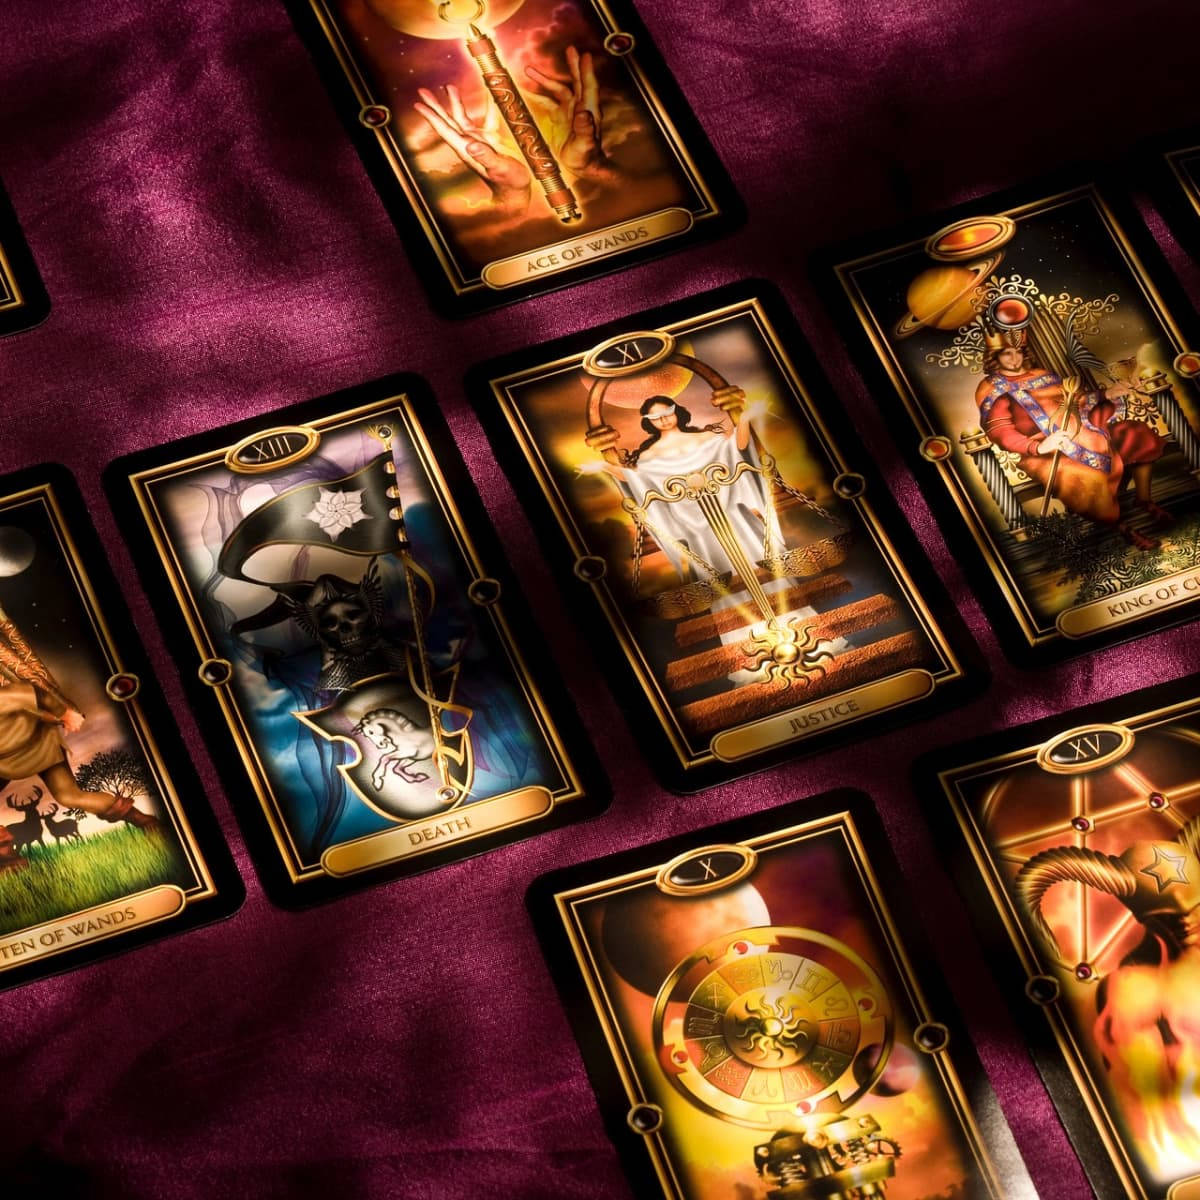 A Group Of Tarot Cards On A Purple Cloth Wallpaper